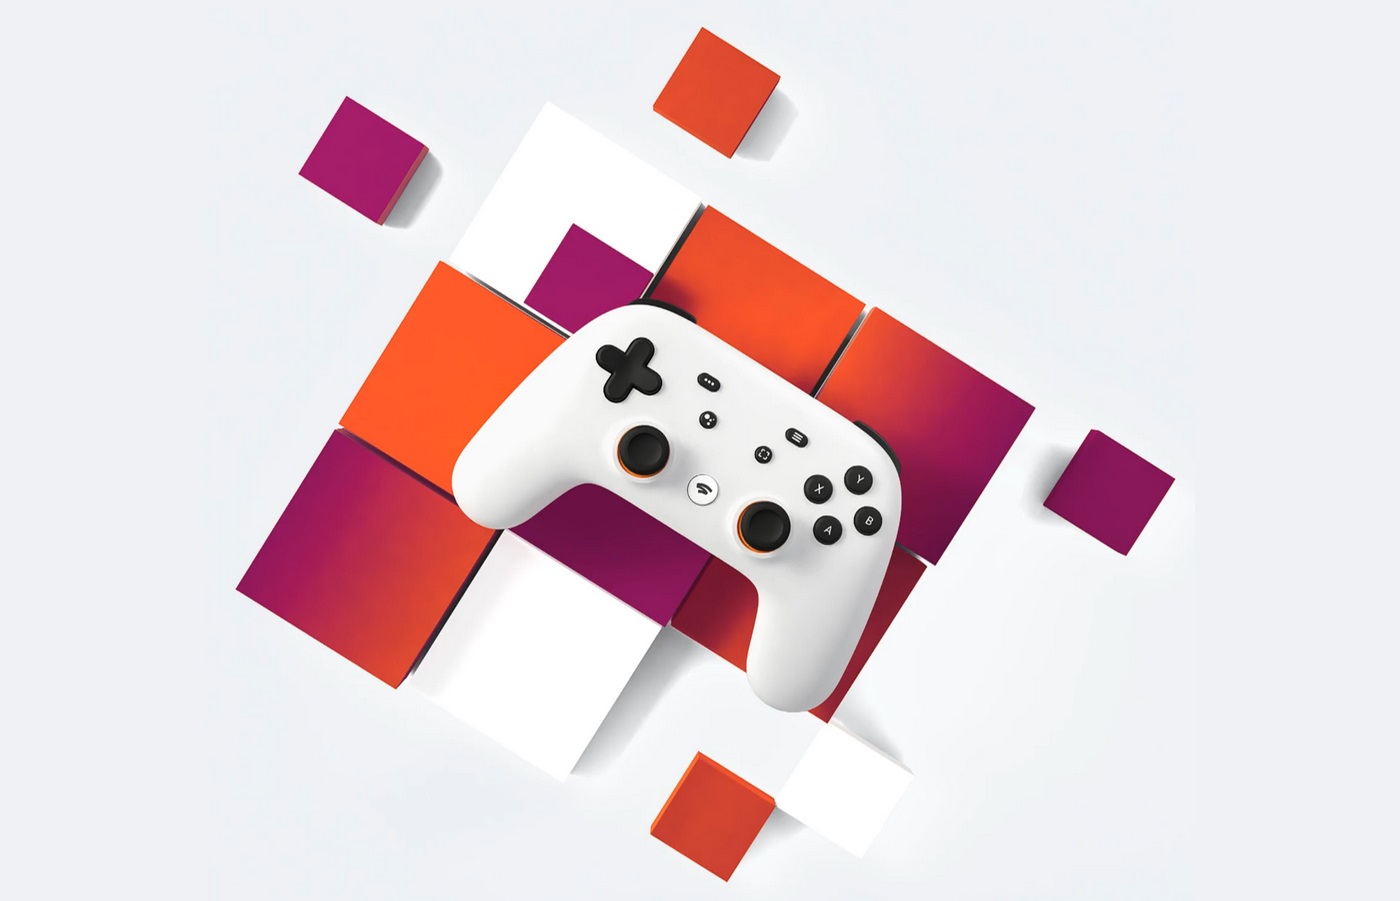 The 9 Biggest Questions About Google S Stadia Game Streaming Service - the 9 biggest questions about google s stadia game streaming service techcrunch